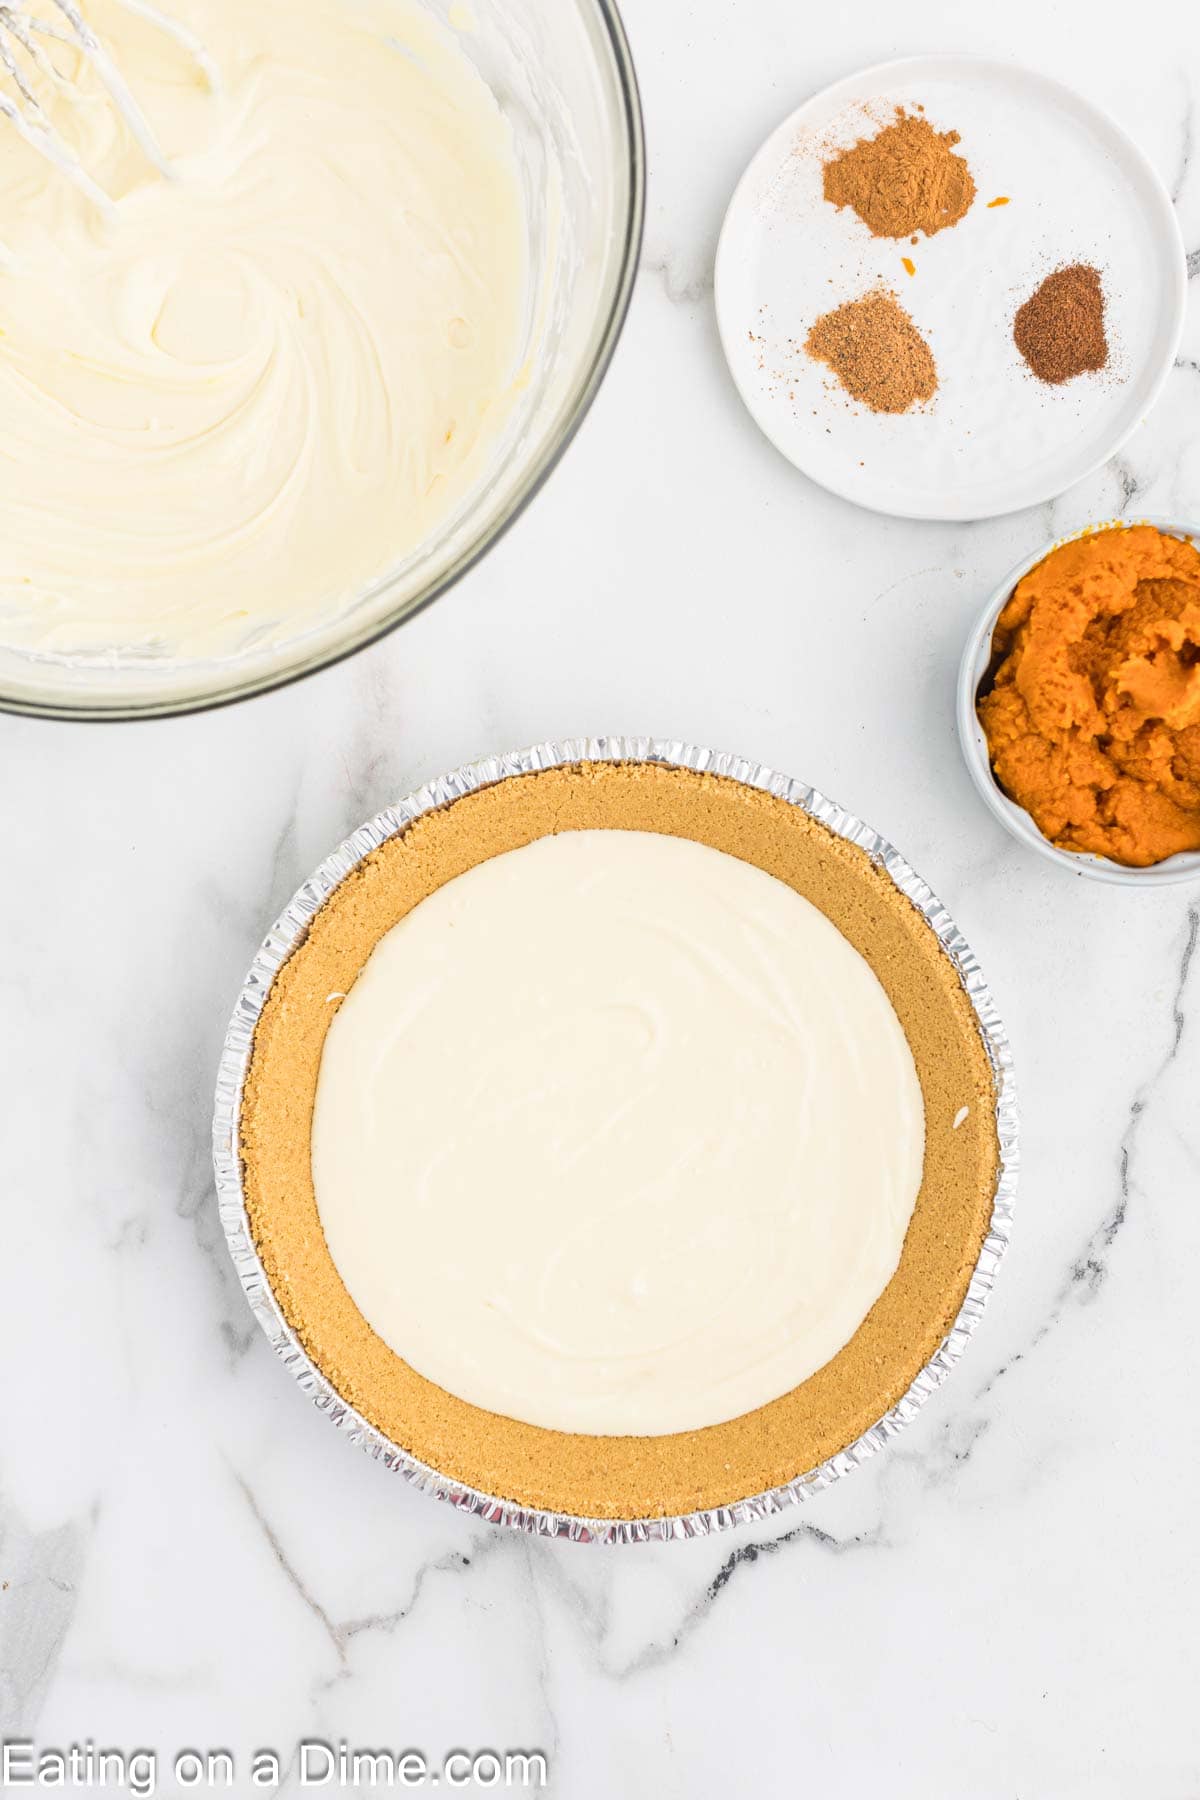 A graham cracker pie crust filled with a creamy mixture rests on a white marble surface. Nearby, bowls hold whipped cream mixture, pumpkin puree, and three types of spices. The ingredients are being prepared for a delectable pumpkin cheesecake recipe.